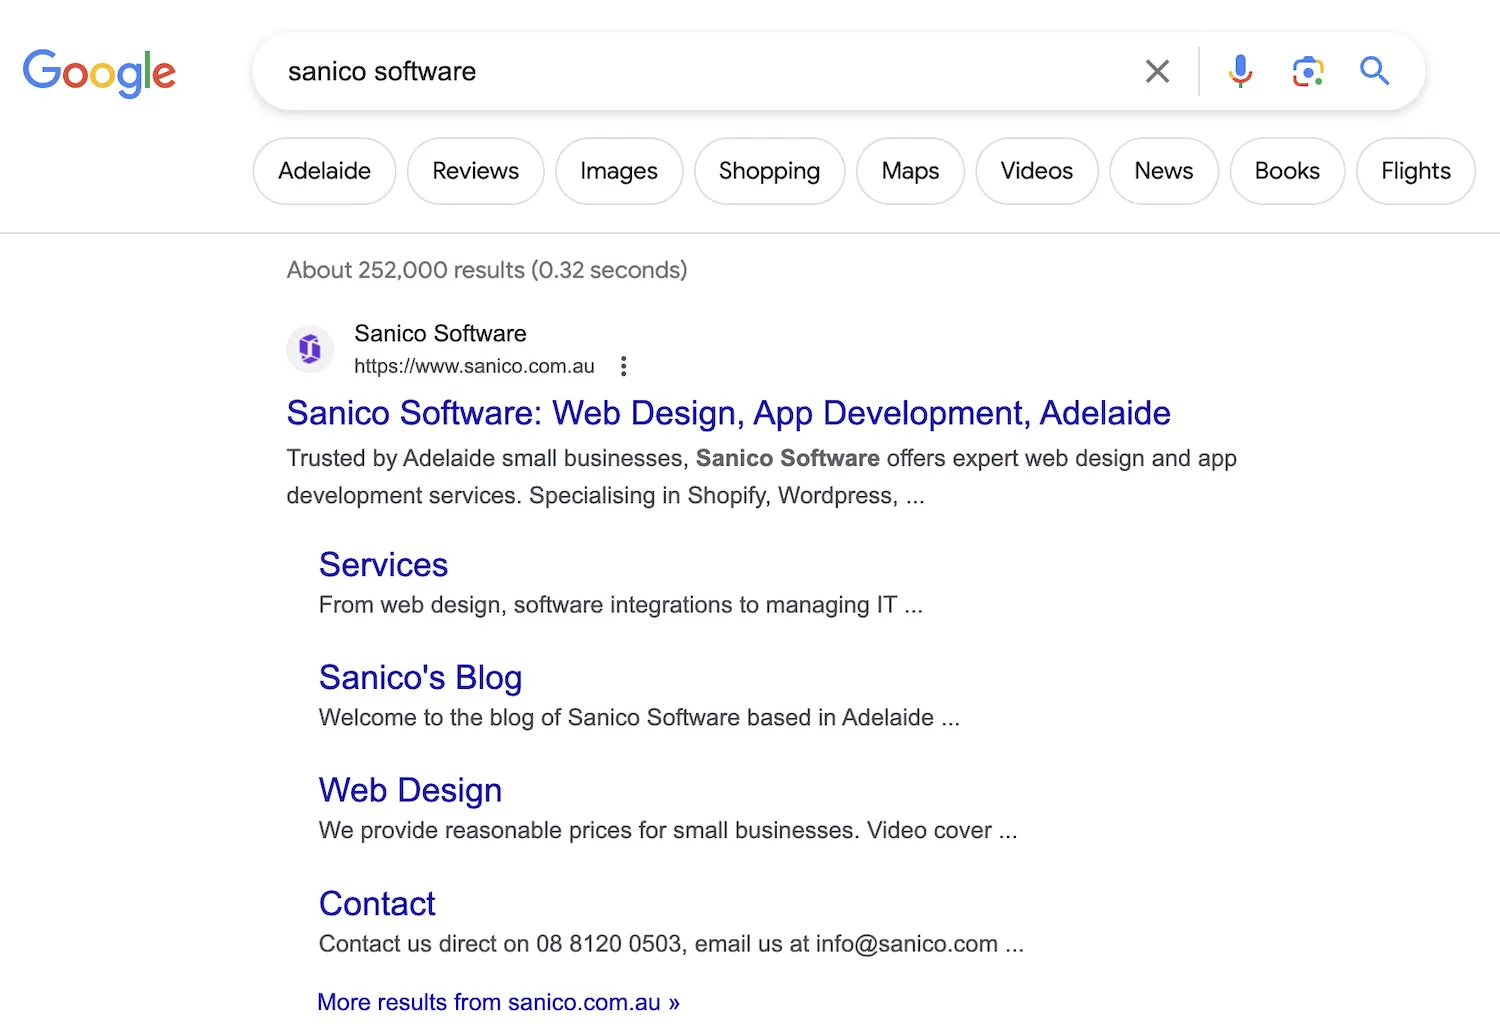 Sanico Software within Google search results.